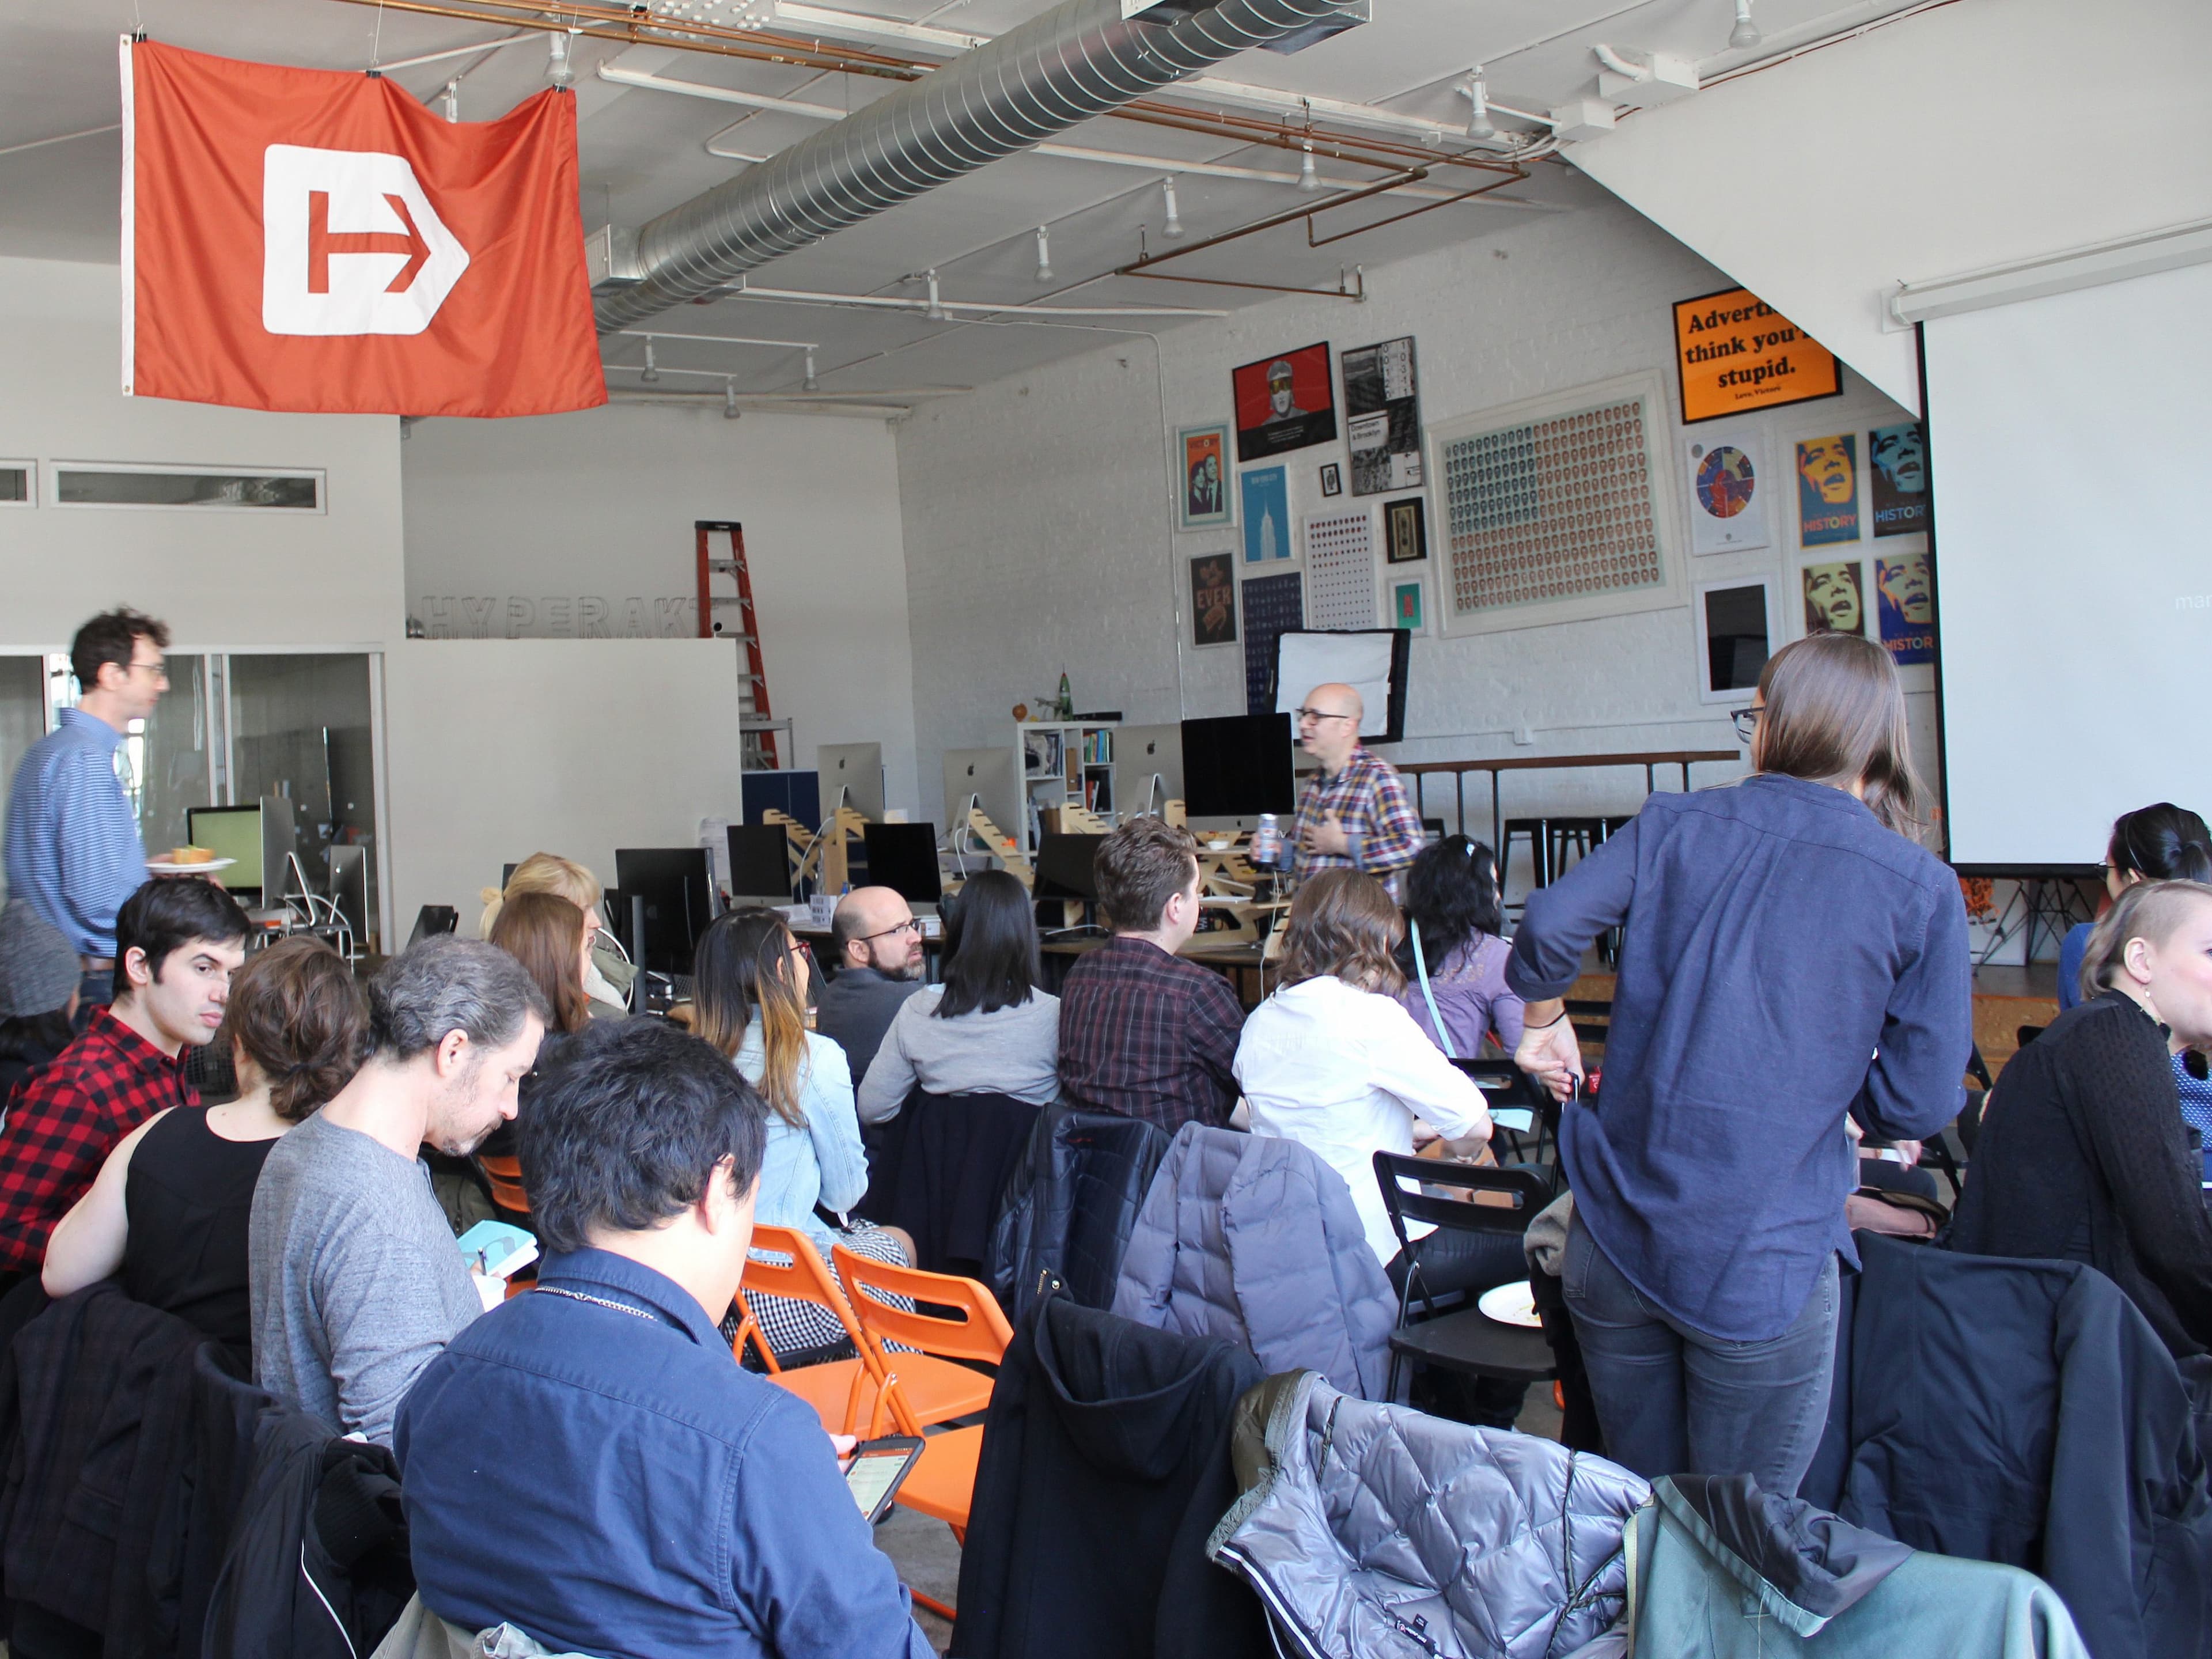 A group of people sits in a classroom with a large orange flag bearing a white "H" hanging from the ceiling. The room has a projector screen, posters on the wall, and a few people standing or walking around. Some attendees are talking, and most are facing toward the front.